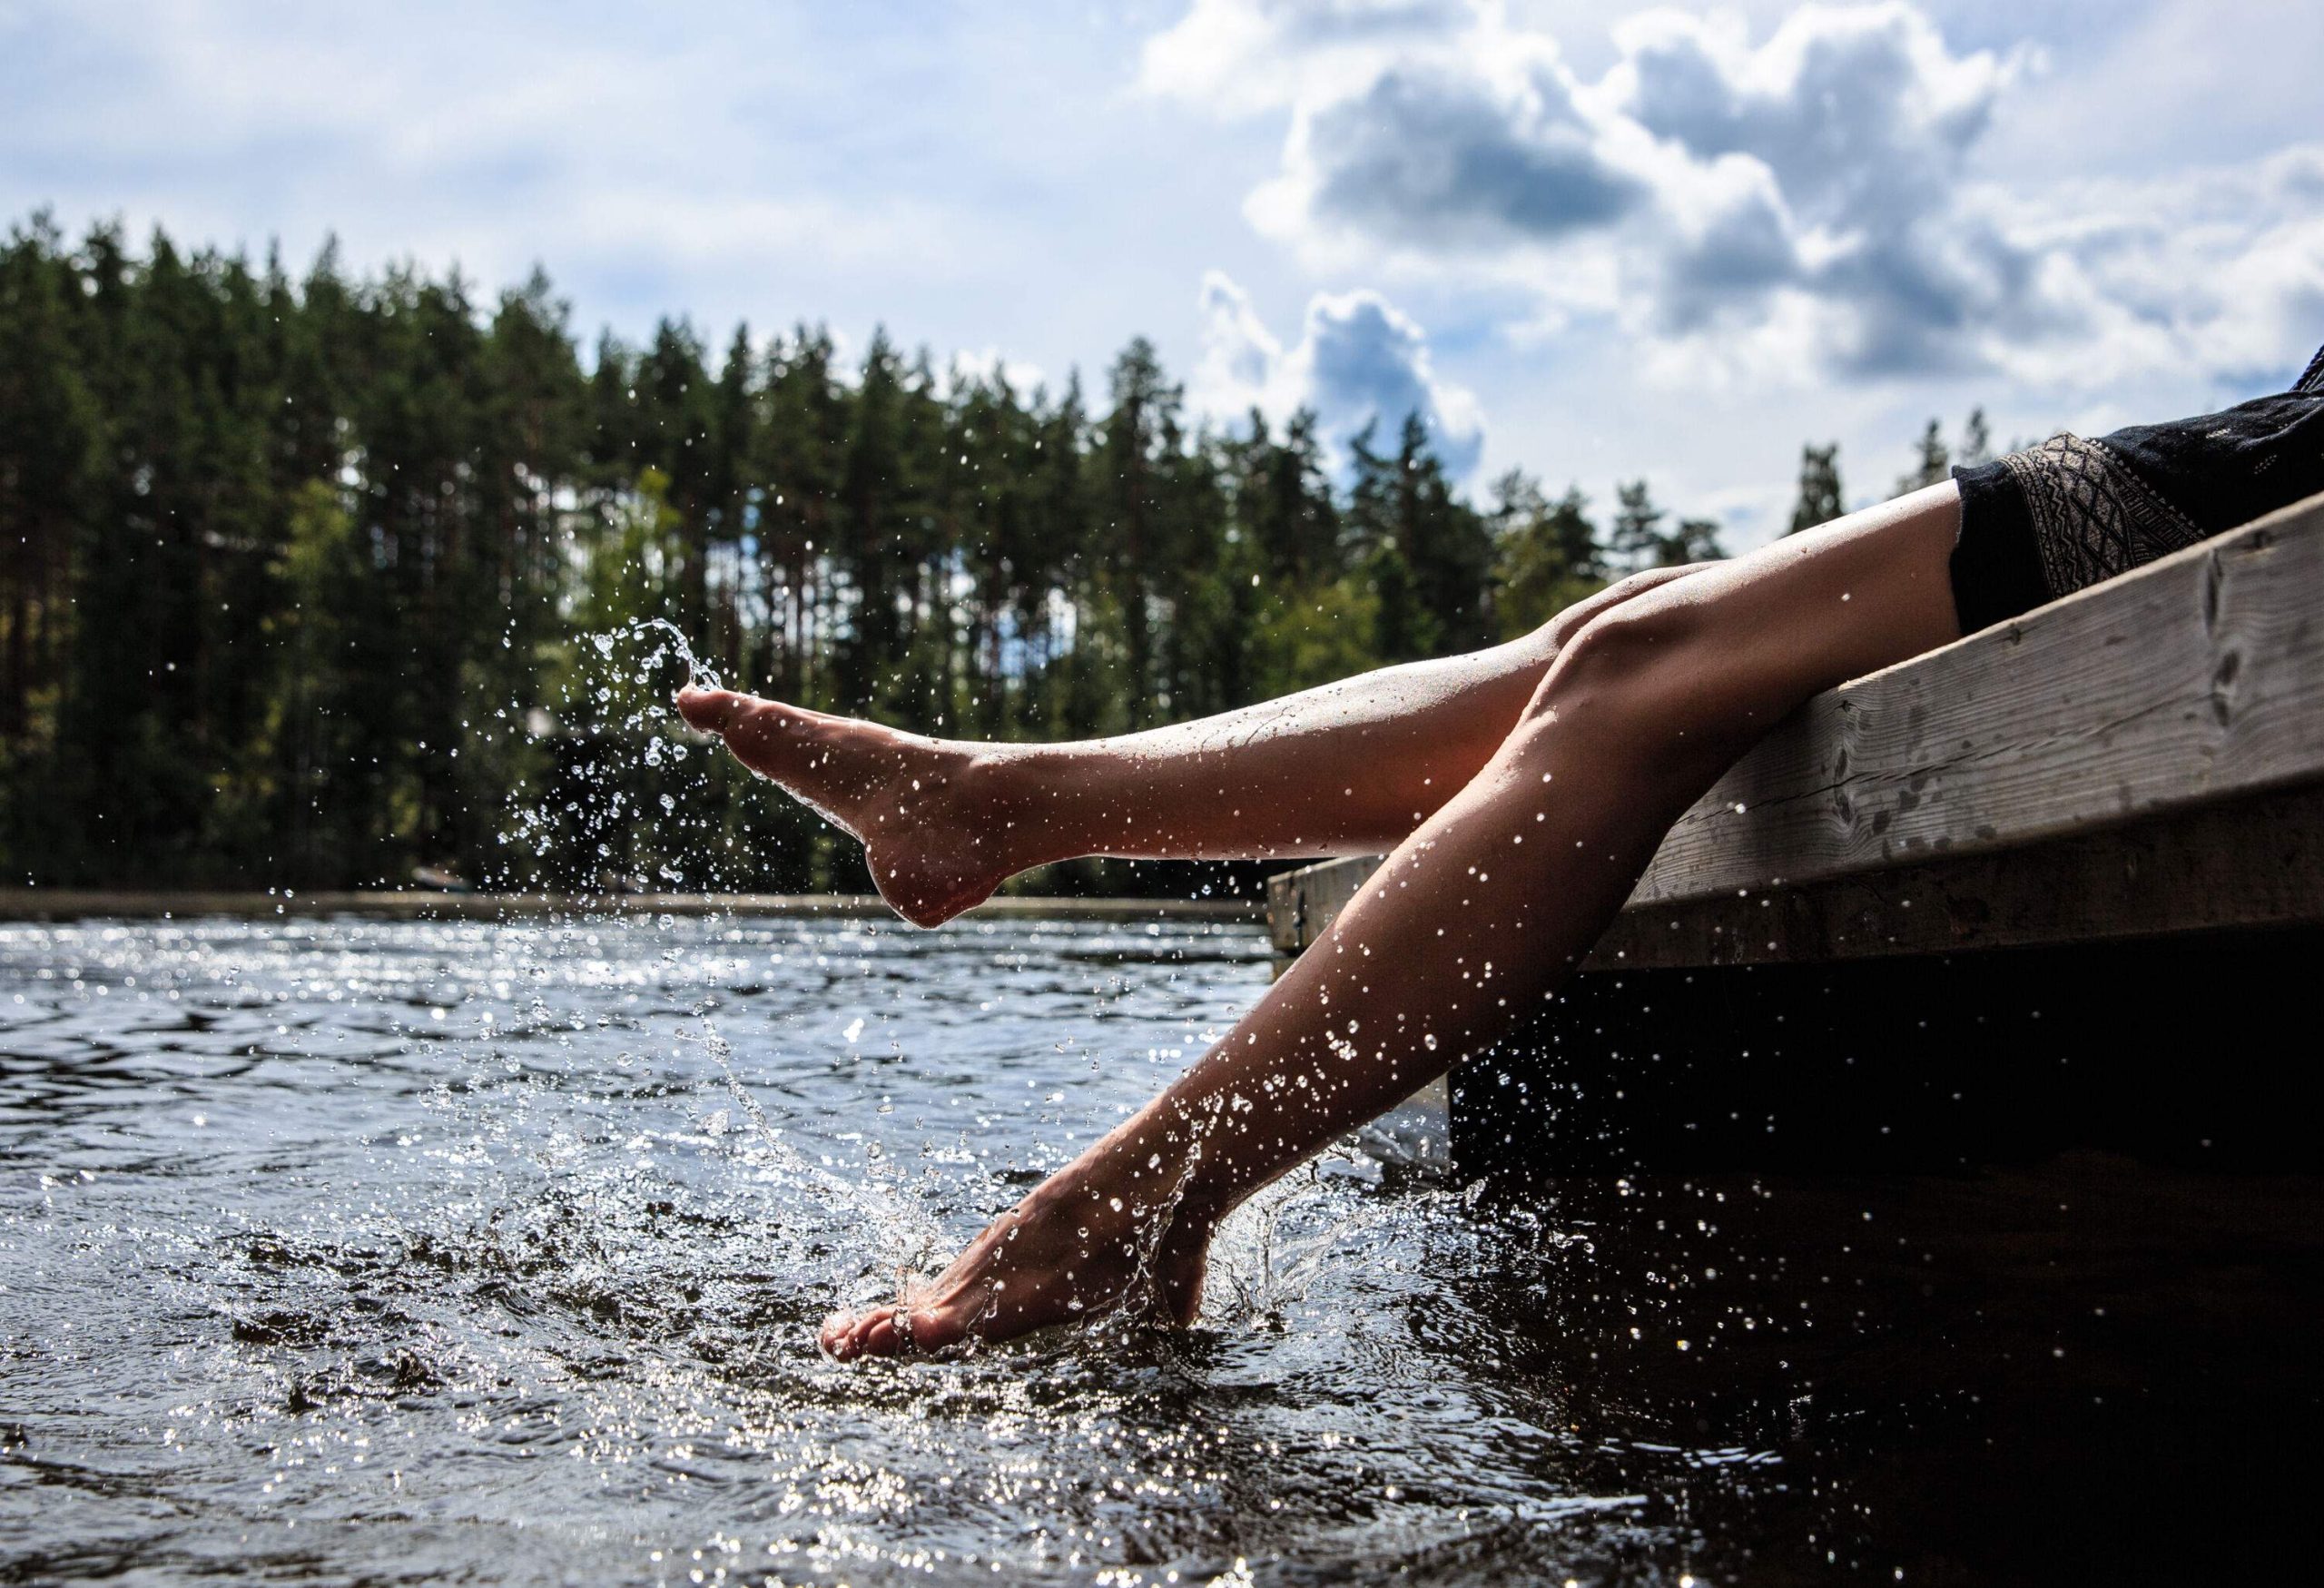 A person sitting on a dock and splashing water with their legs in the lake.